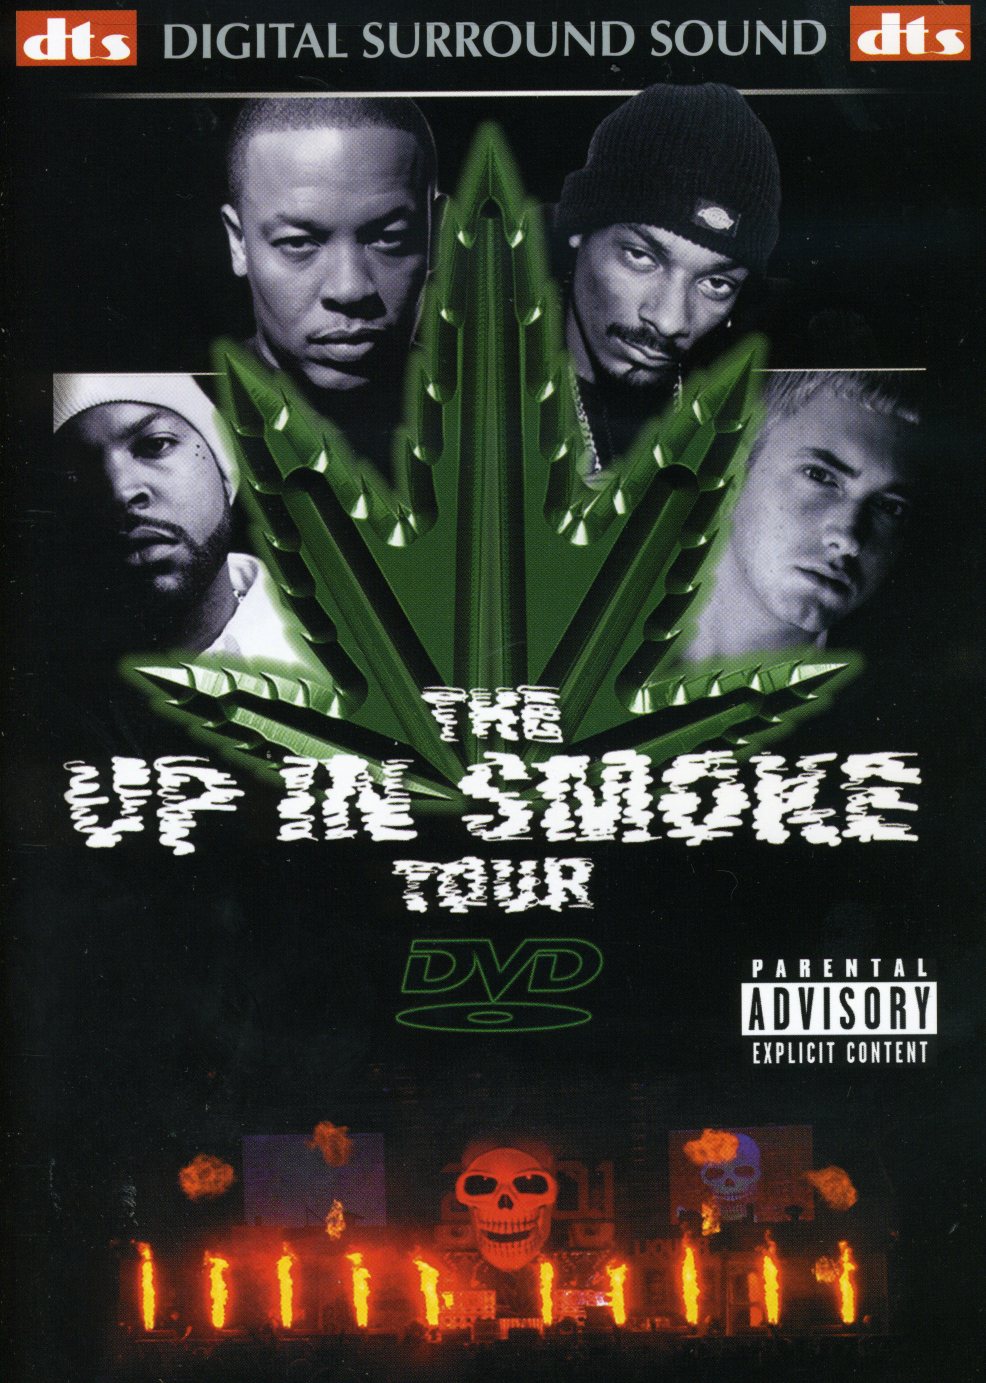 UP IN SMOKE / (DTS)